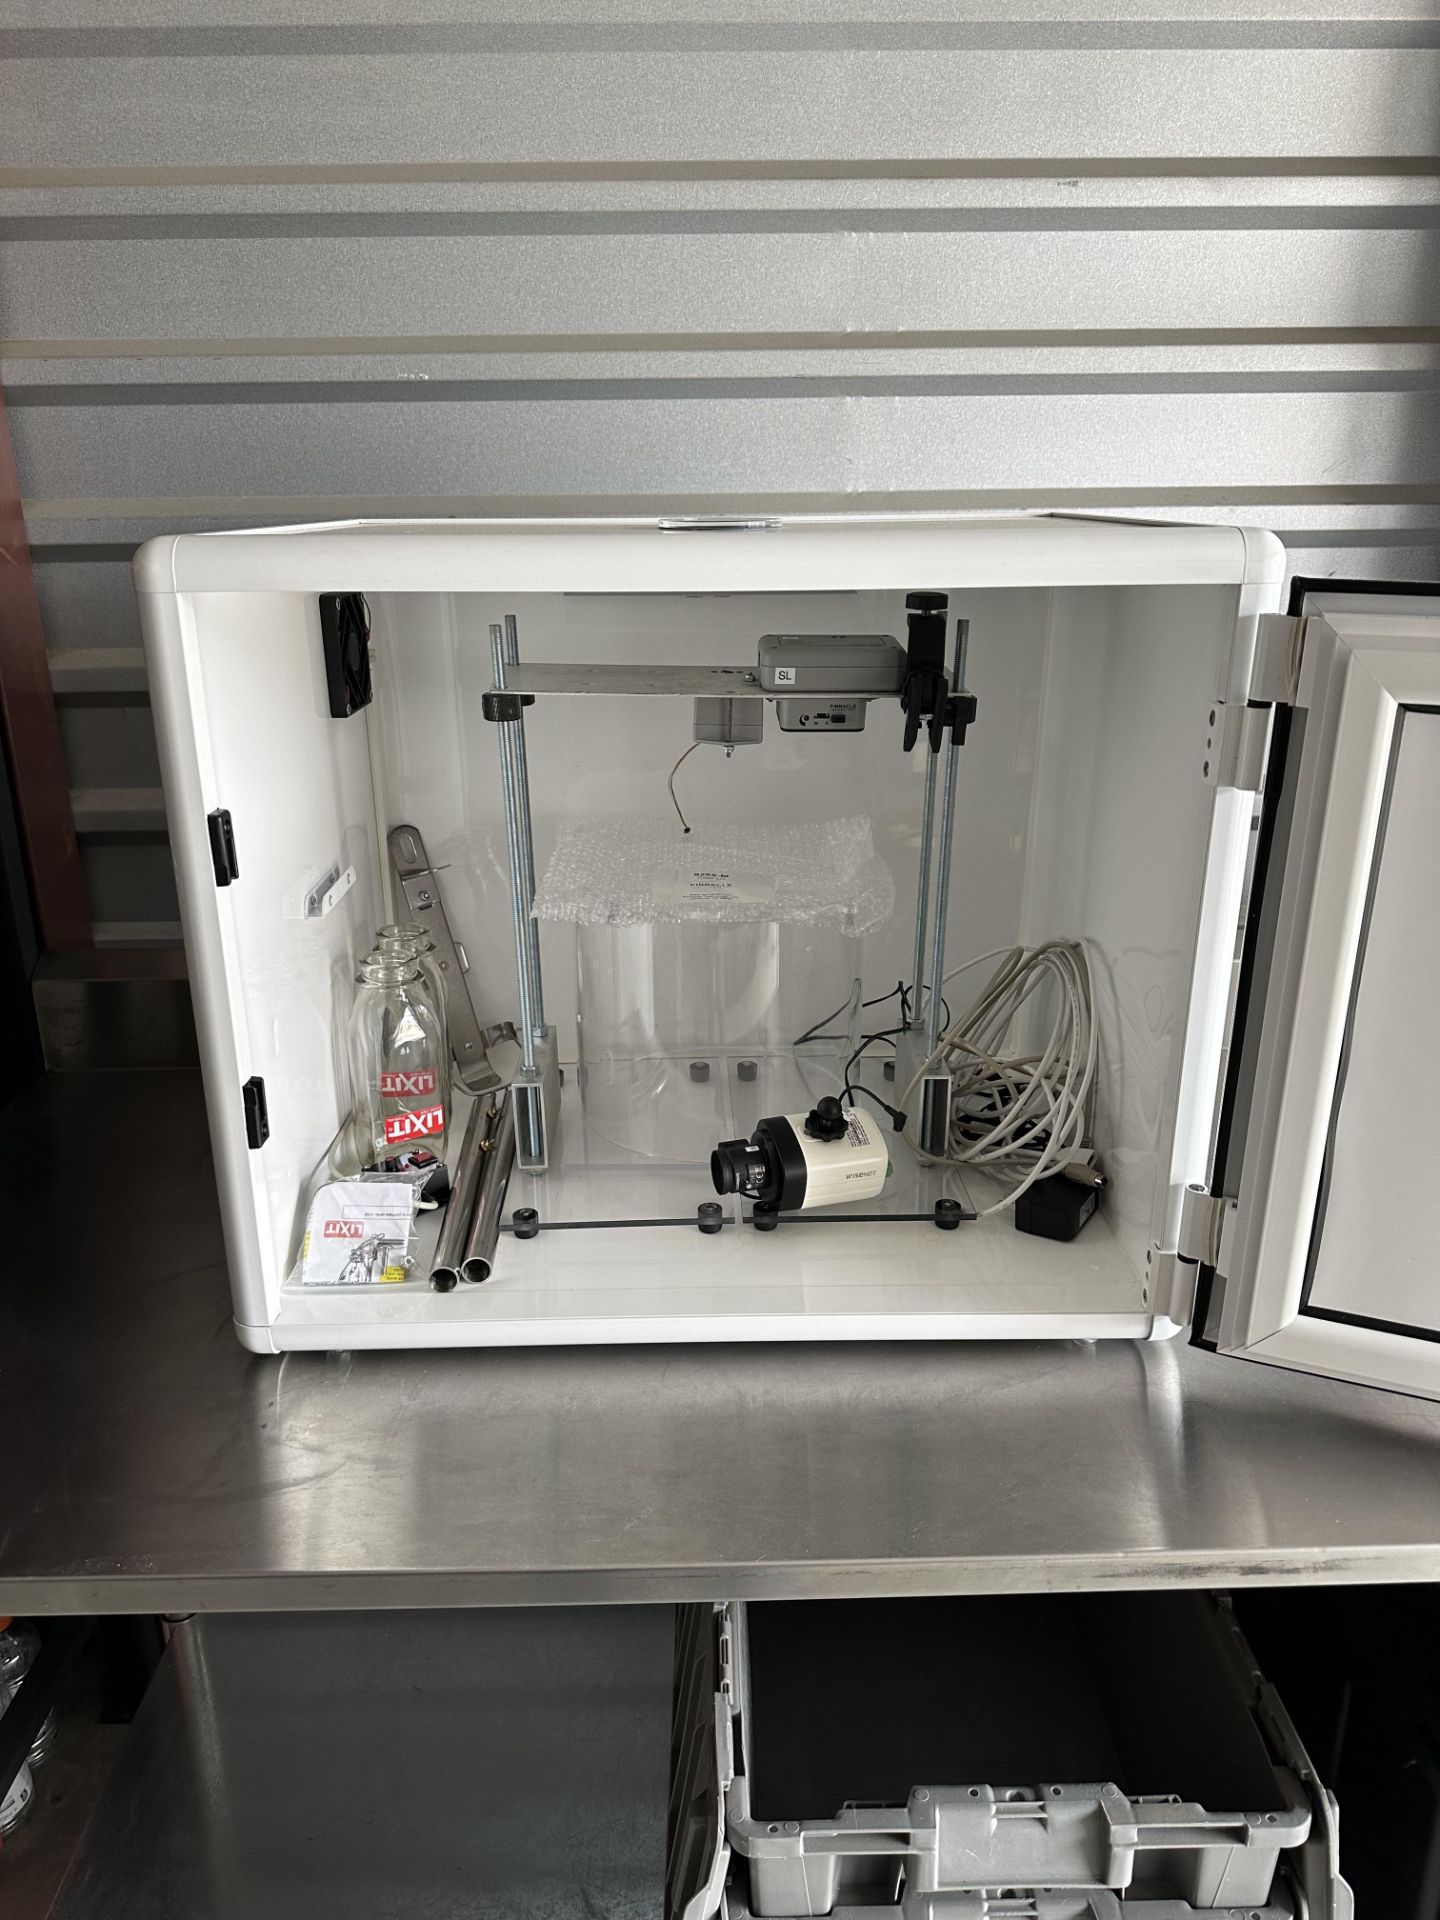 Harvard Apparatus Panlab Isolation Box Behavioral Chamber with LIXIT feeder and Pinnacle model - Image 6 of 6